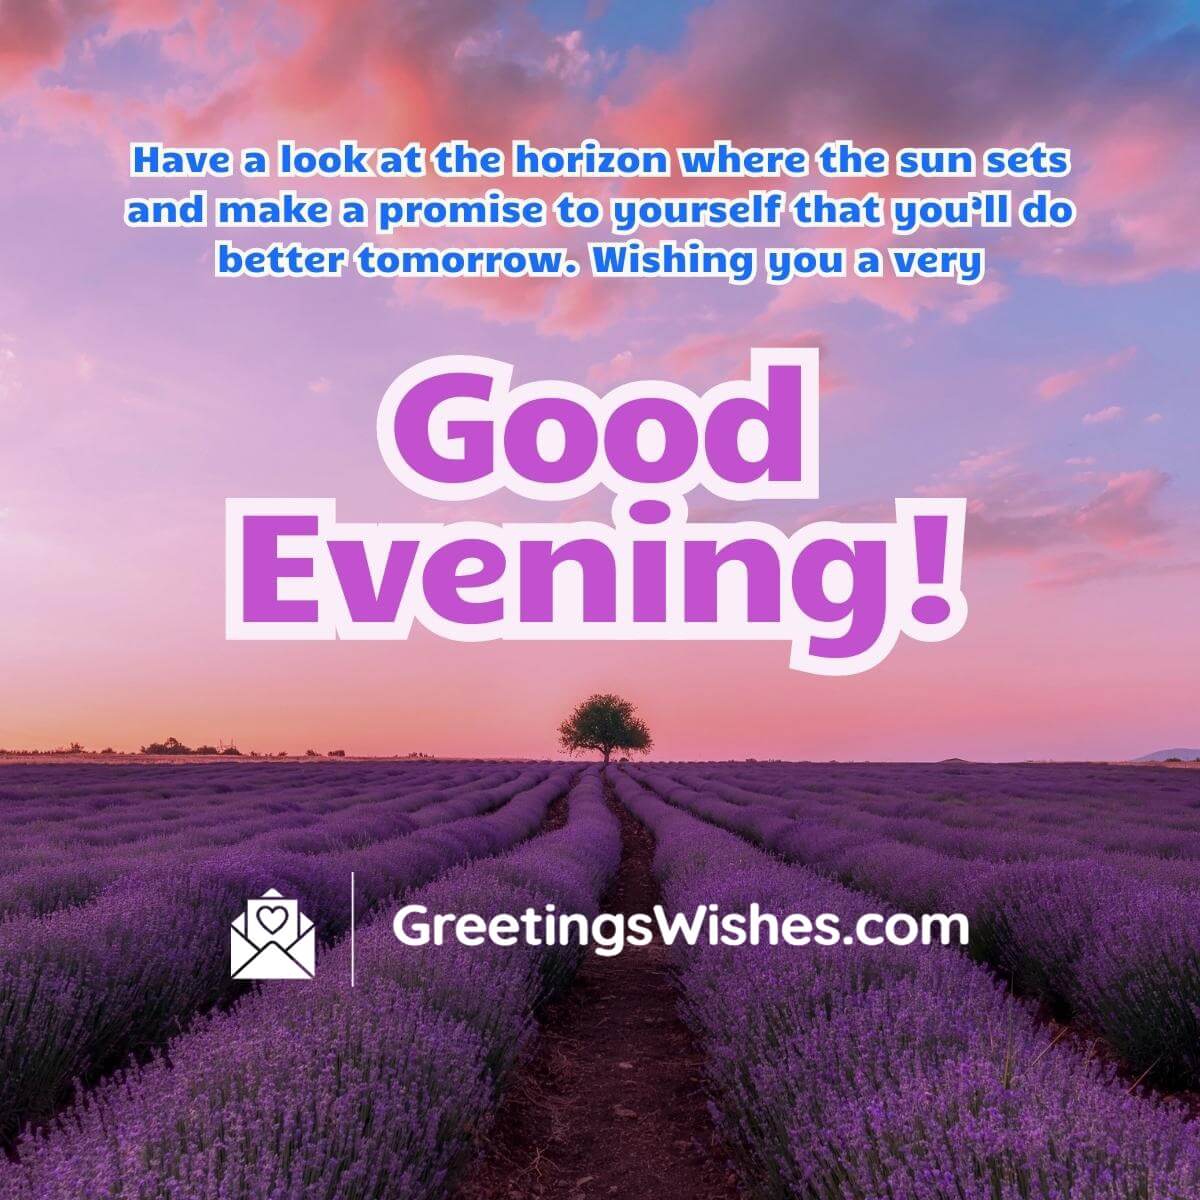 Good Evening Messages For Friends - Greetings Wishes